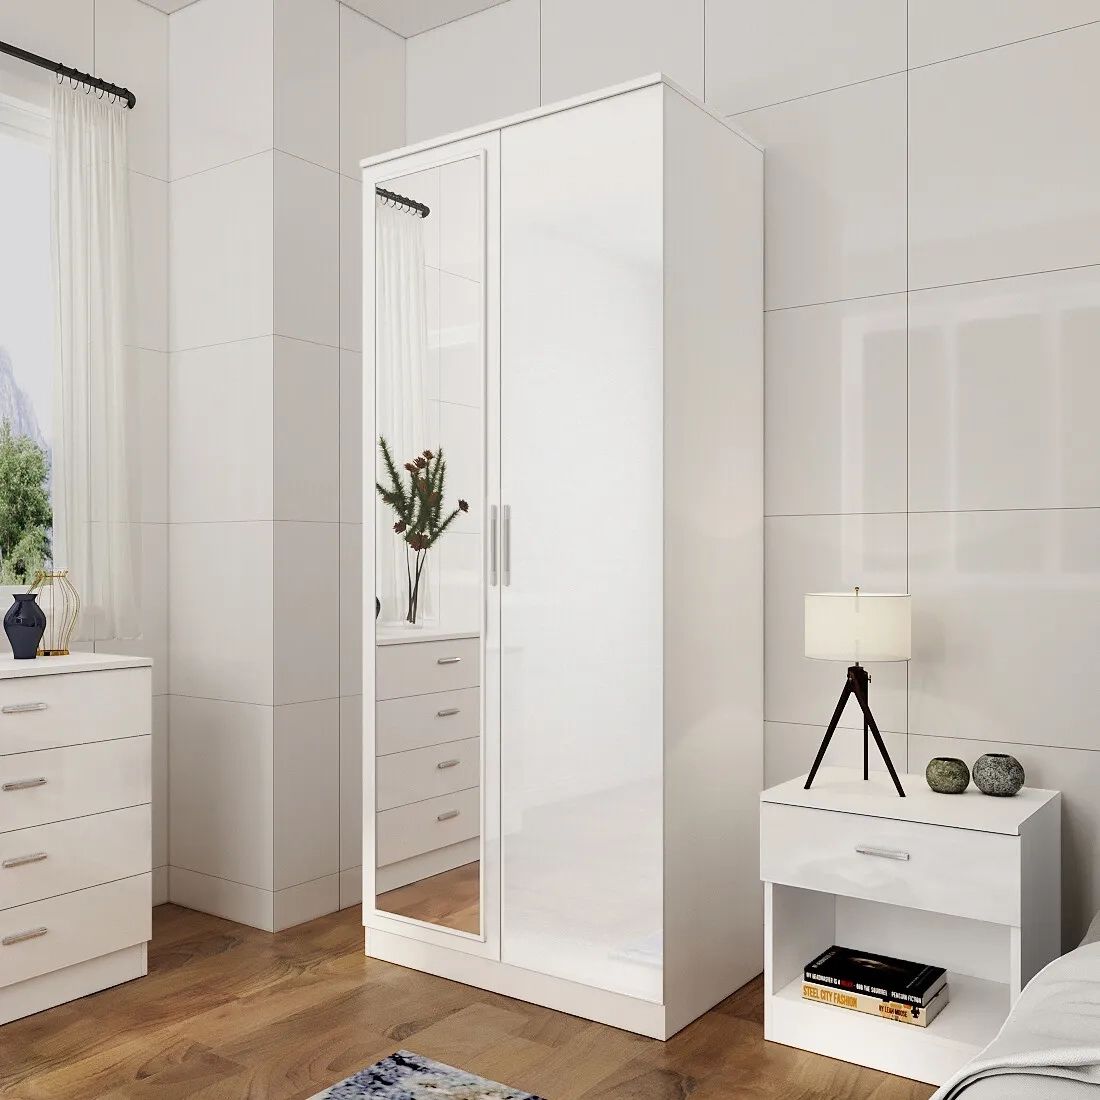 Bedroom Furniture High Gloss 2 Doors Wardrobe Storage Cupboard With Hanging  Rail | Ebay Inside Tall White Gloss Wardrobes (View 12 of 15)